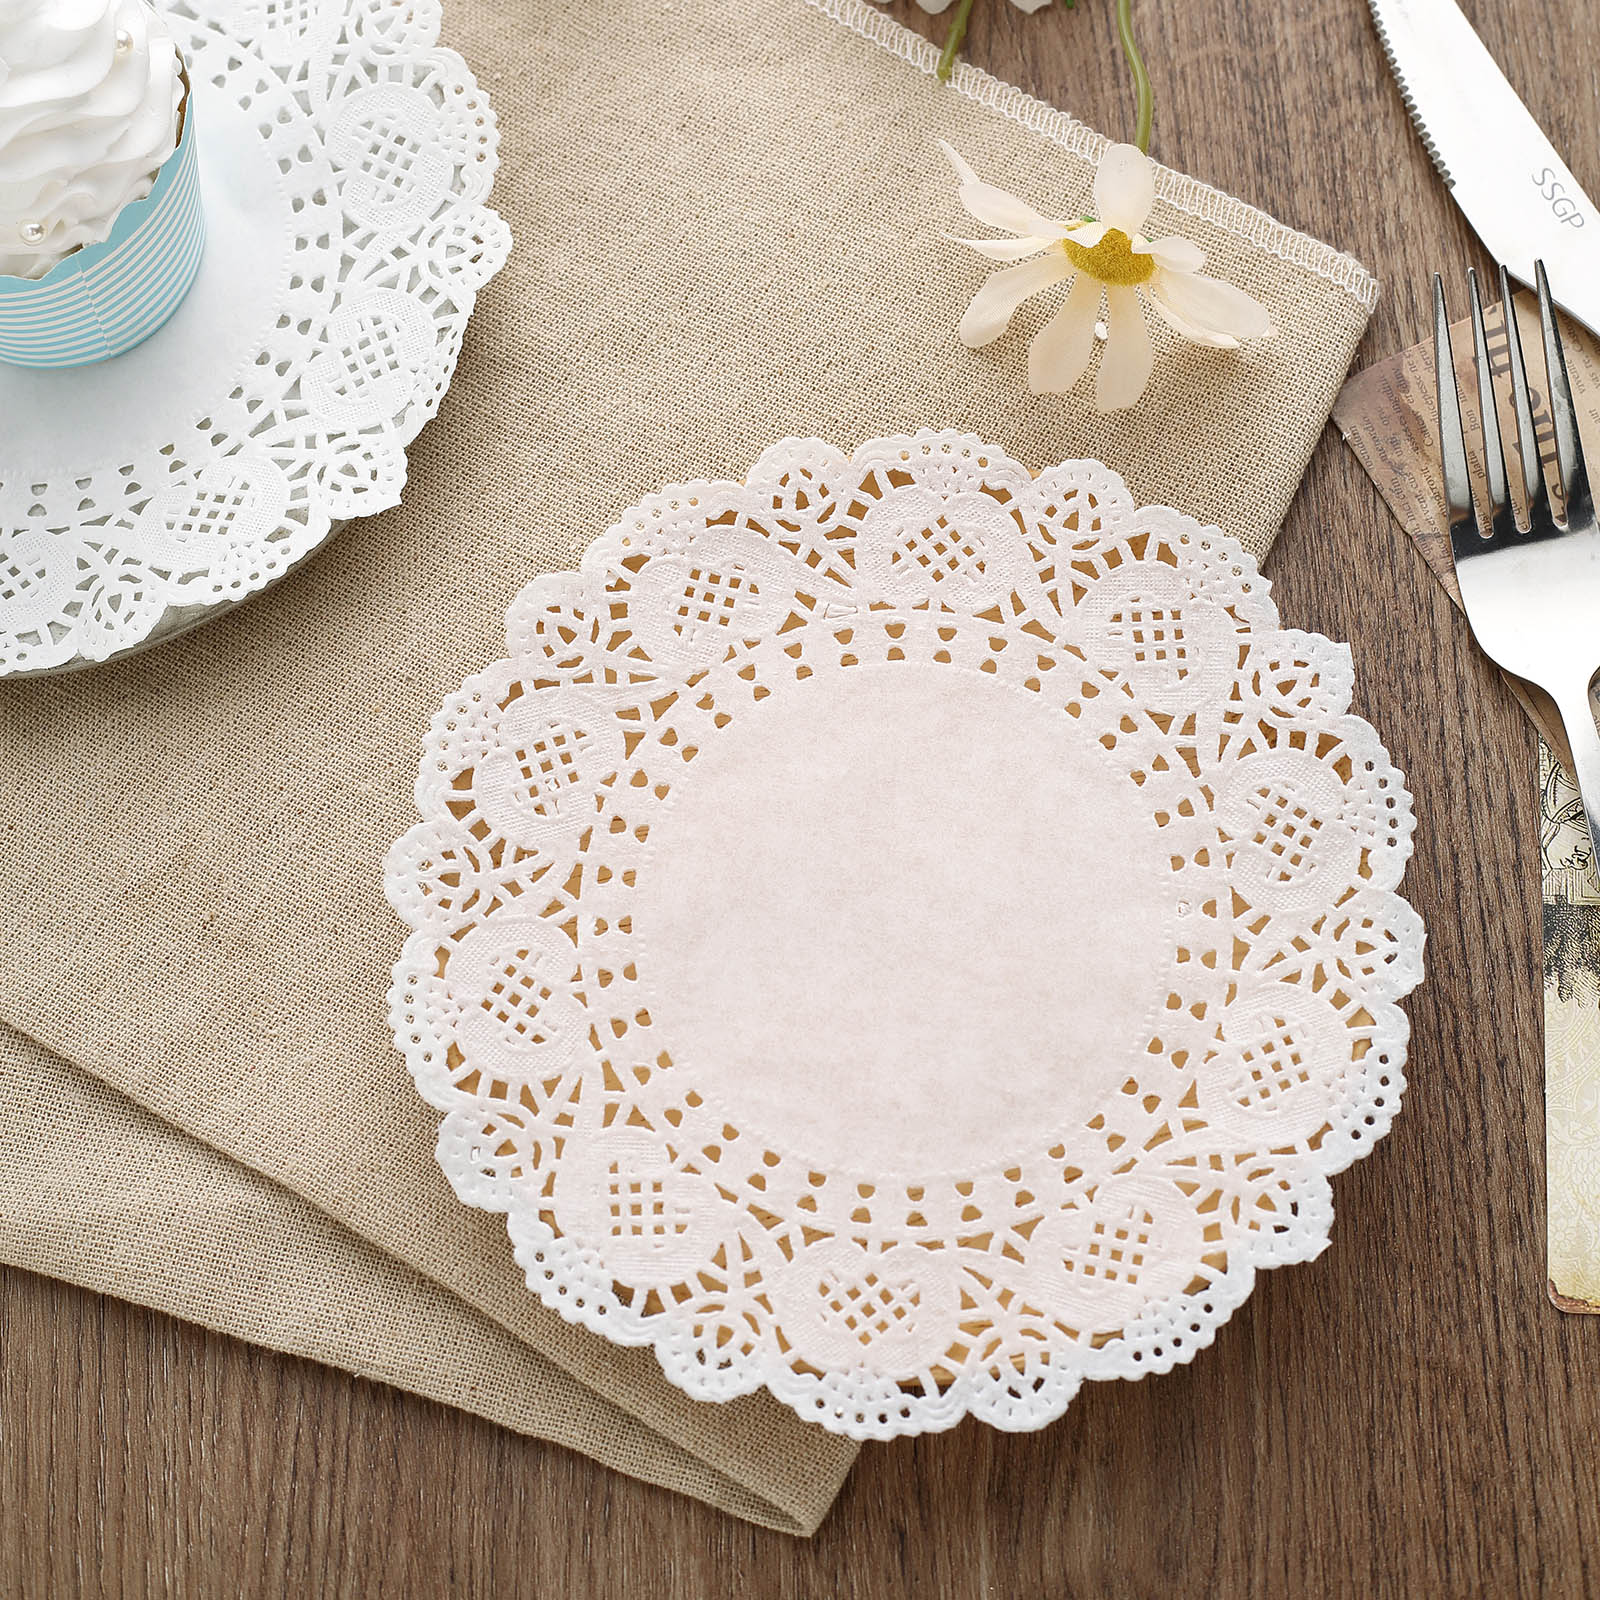 100 Pcs | 6 Round White Lace Paper Doilies, Food Grade Paper | by Tableclothsfactory